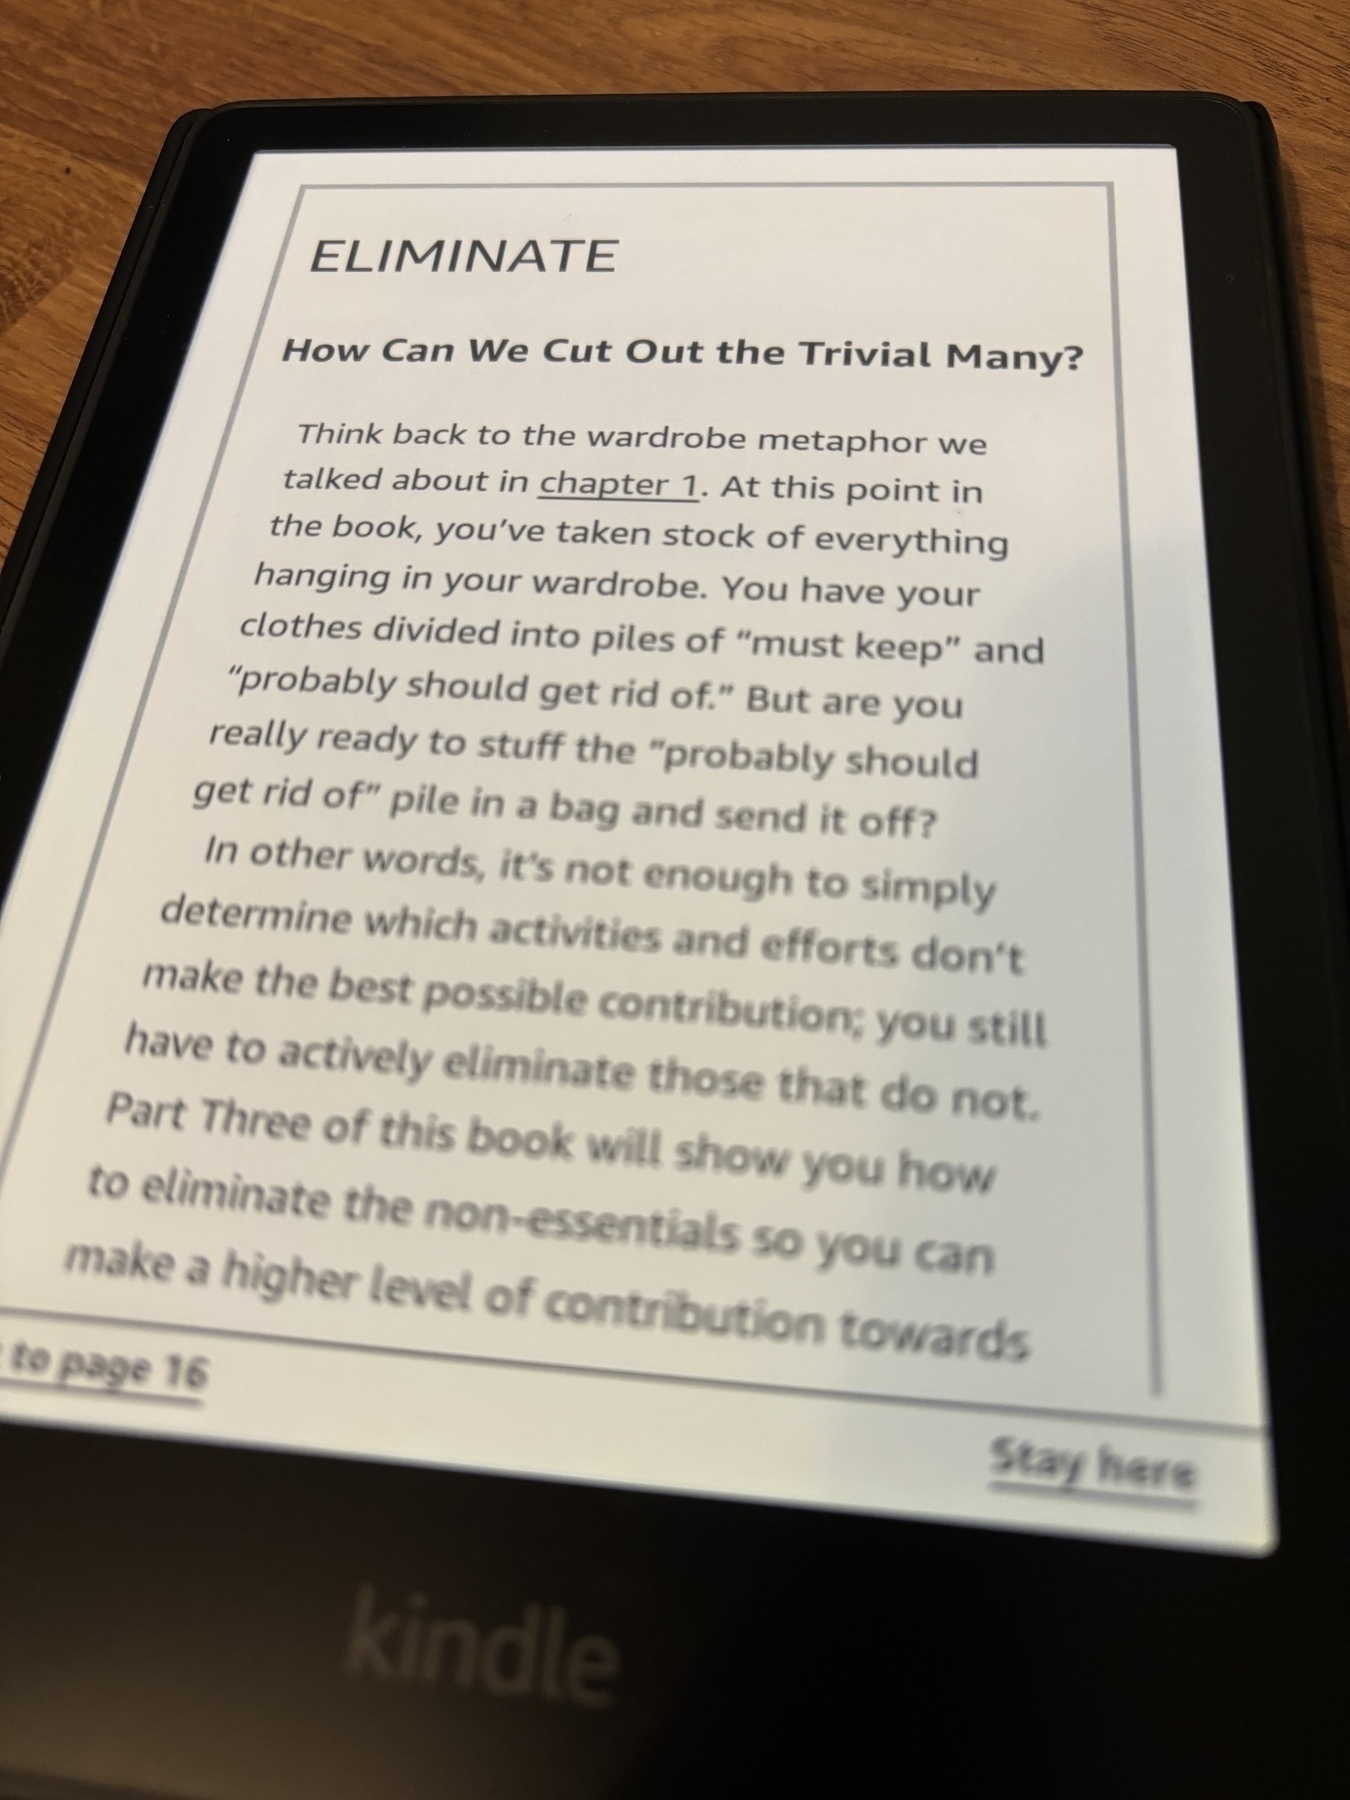 Photo of Essentialism on the Amazon Kindle Paperwhite. 